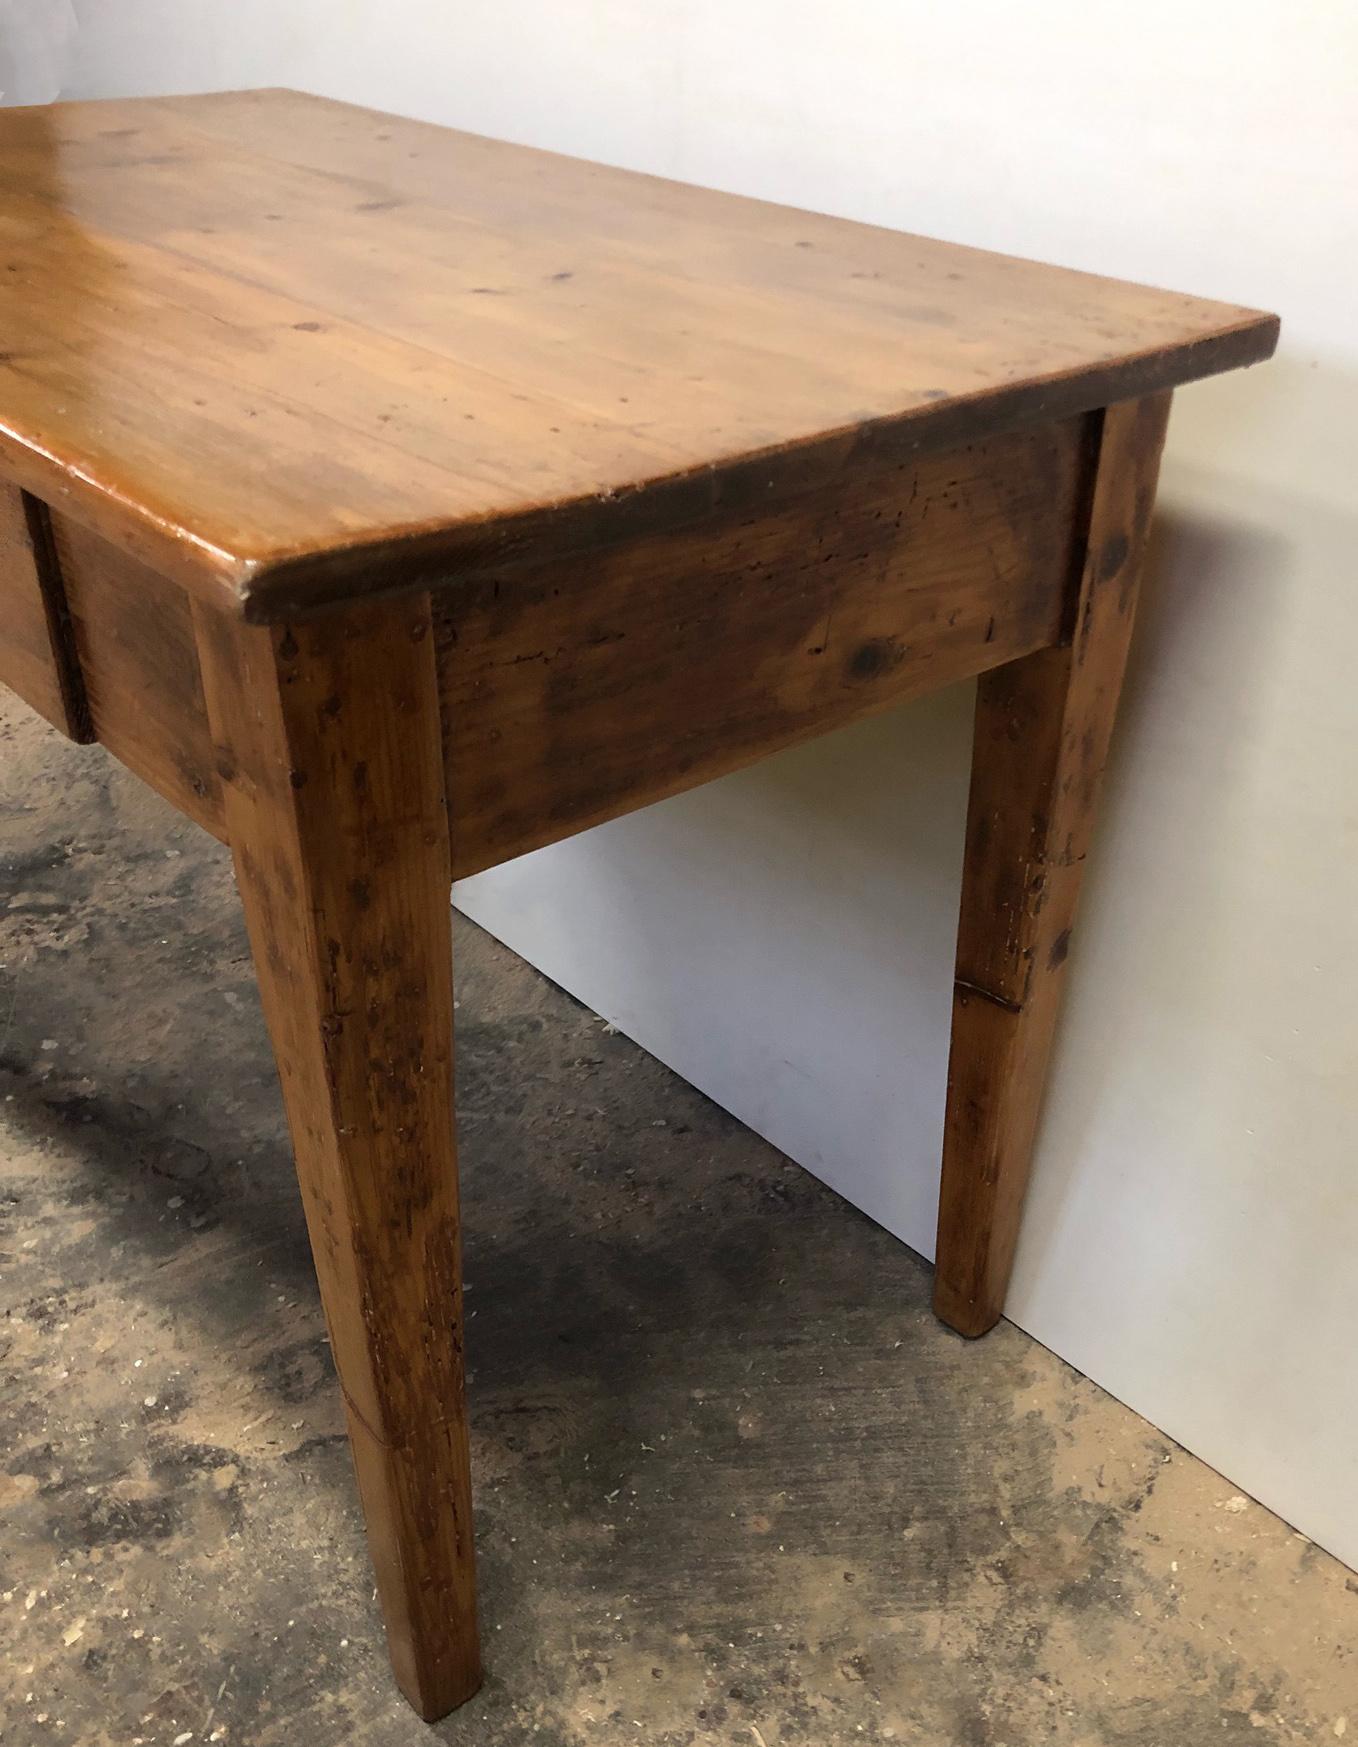 Rustic Tuscan Fir Desk Table, Original from 1900, Honey Color 4